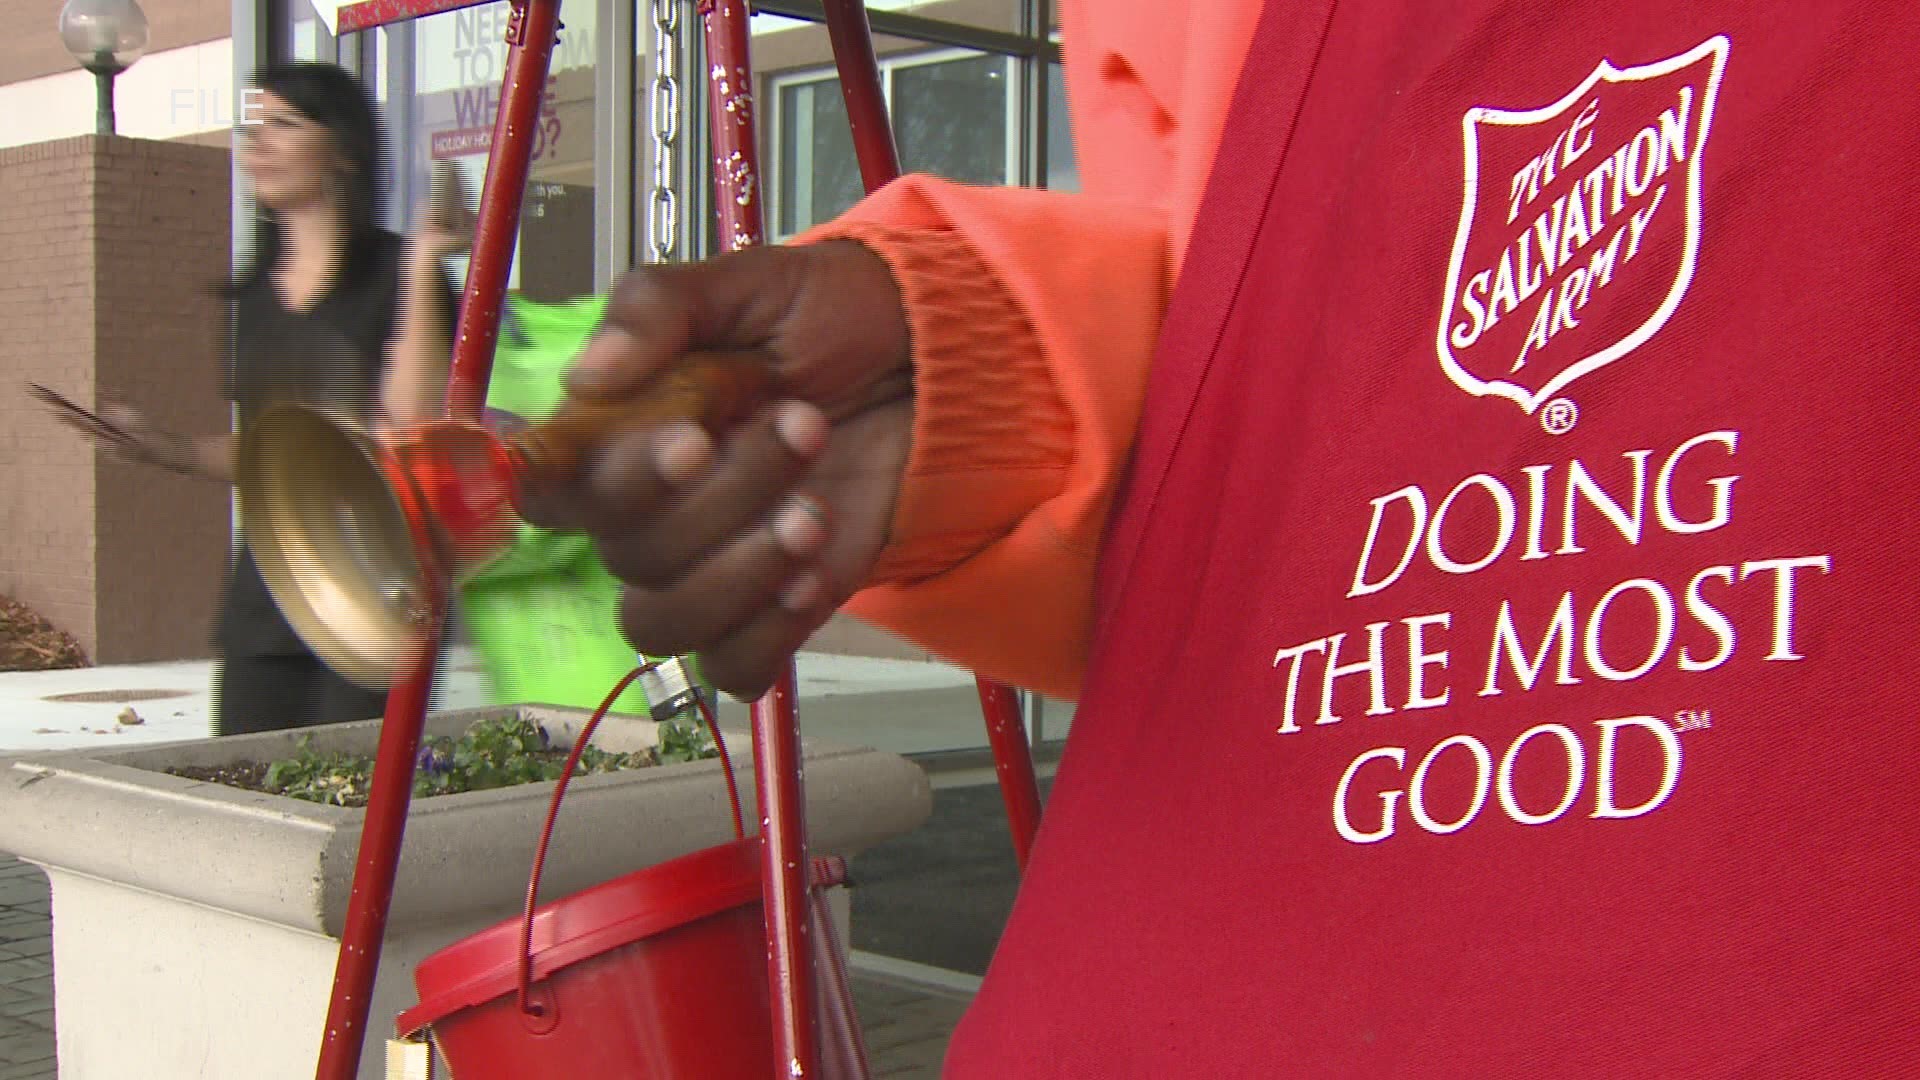 With fewer people going into stores and instead of shopping online, the organization is worried fewer people will donate to their red kettle program.